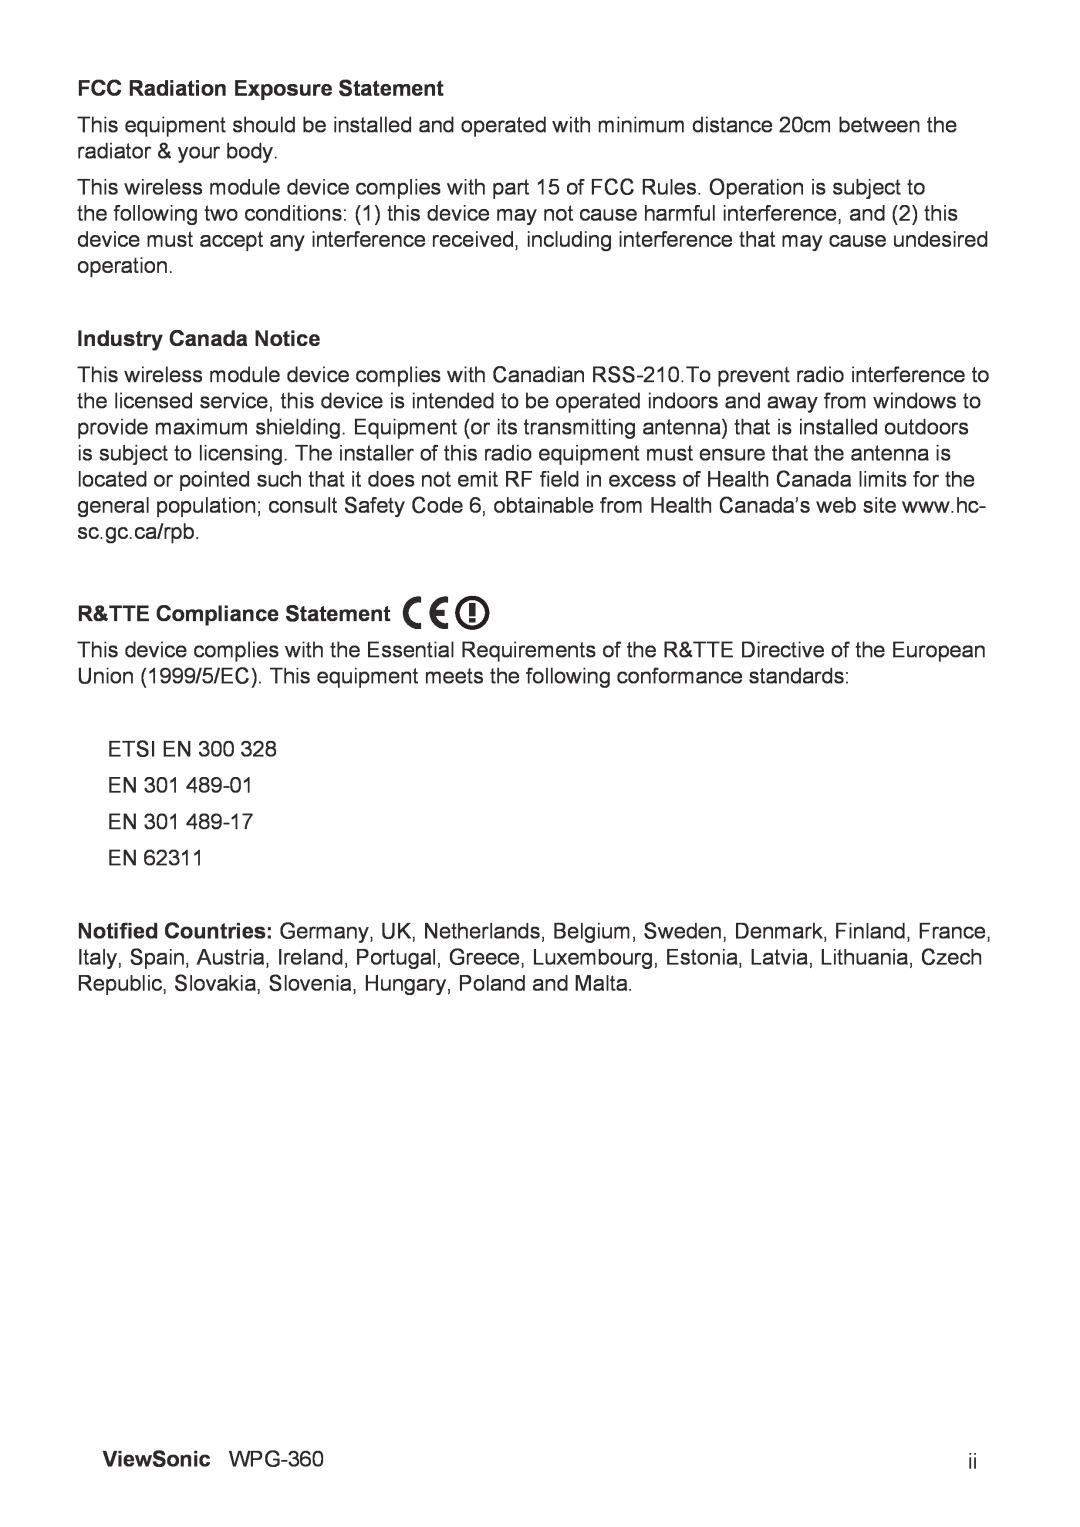 ViewSonic manual FCC Radiation Exposure Statement, Industry Canada Notice, R&TTE Compliance Statement, ViewSonic WPG-360 